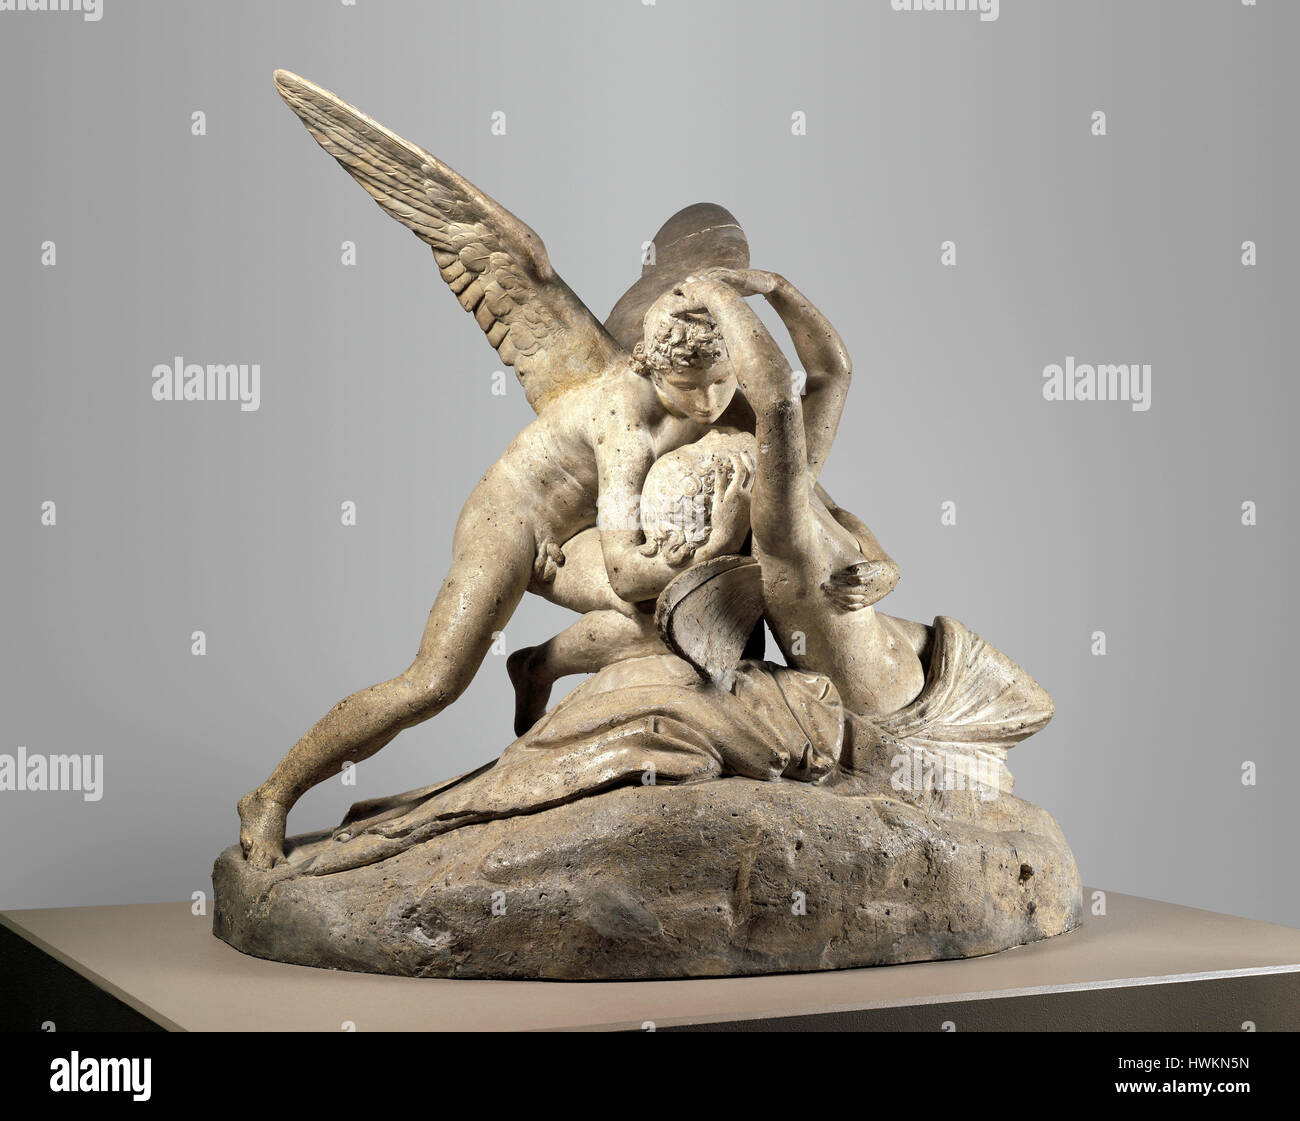 Plaster sculpture of Cupid and Psyche by Antonio Cavona Stock Photo